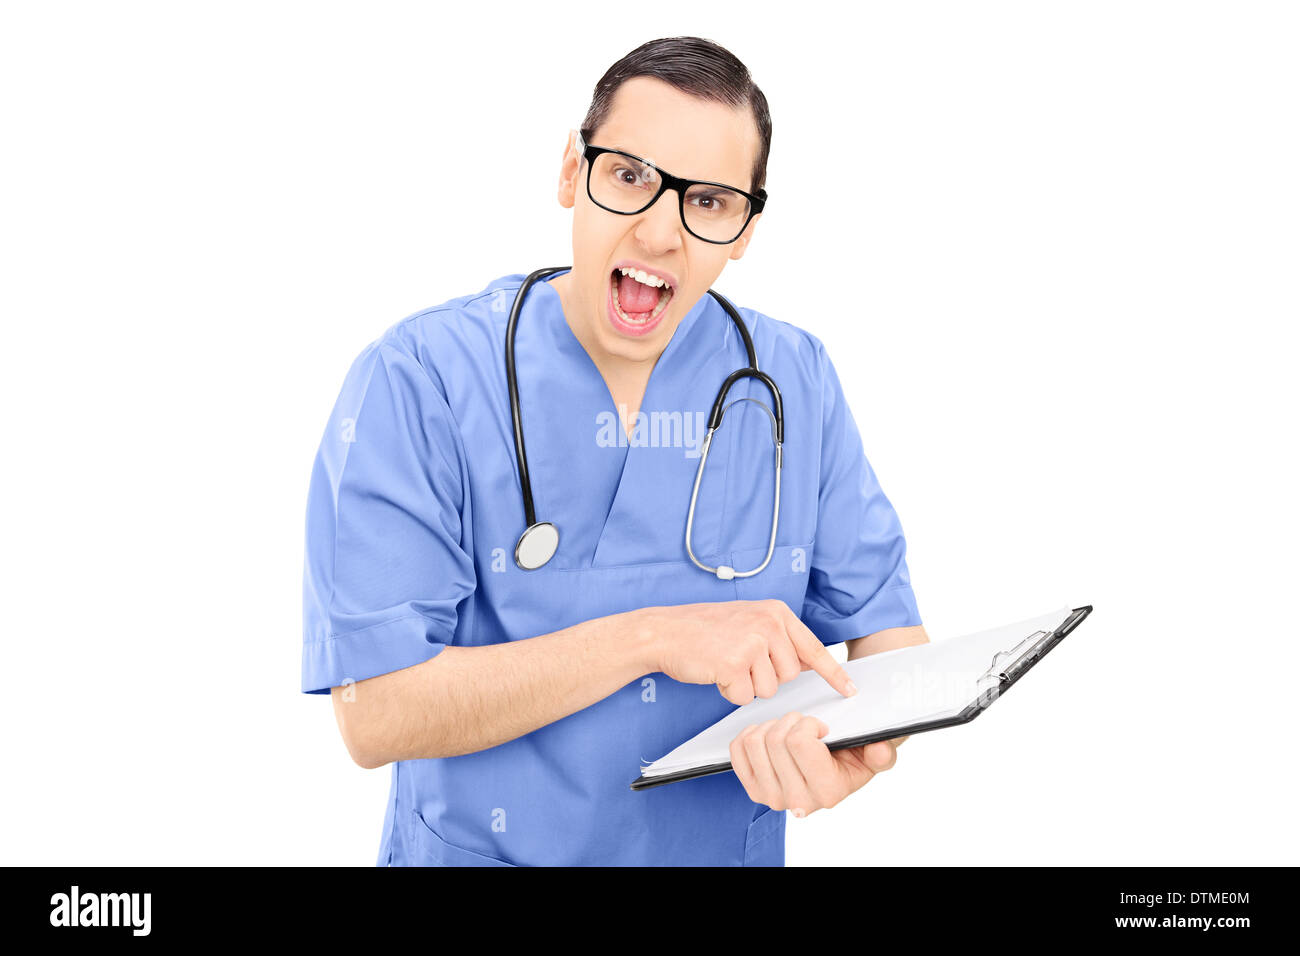 Furious male doctor screaming Stock Photo